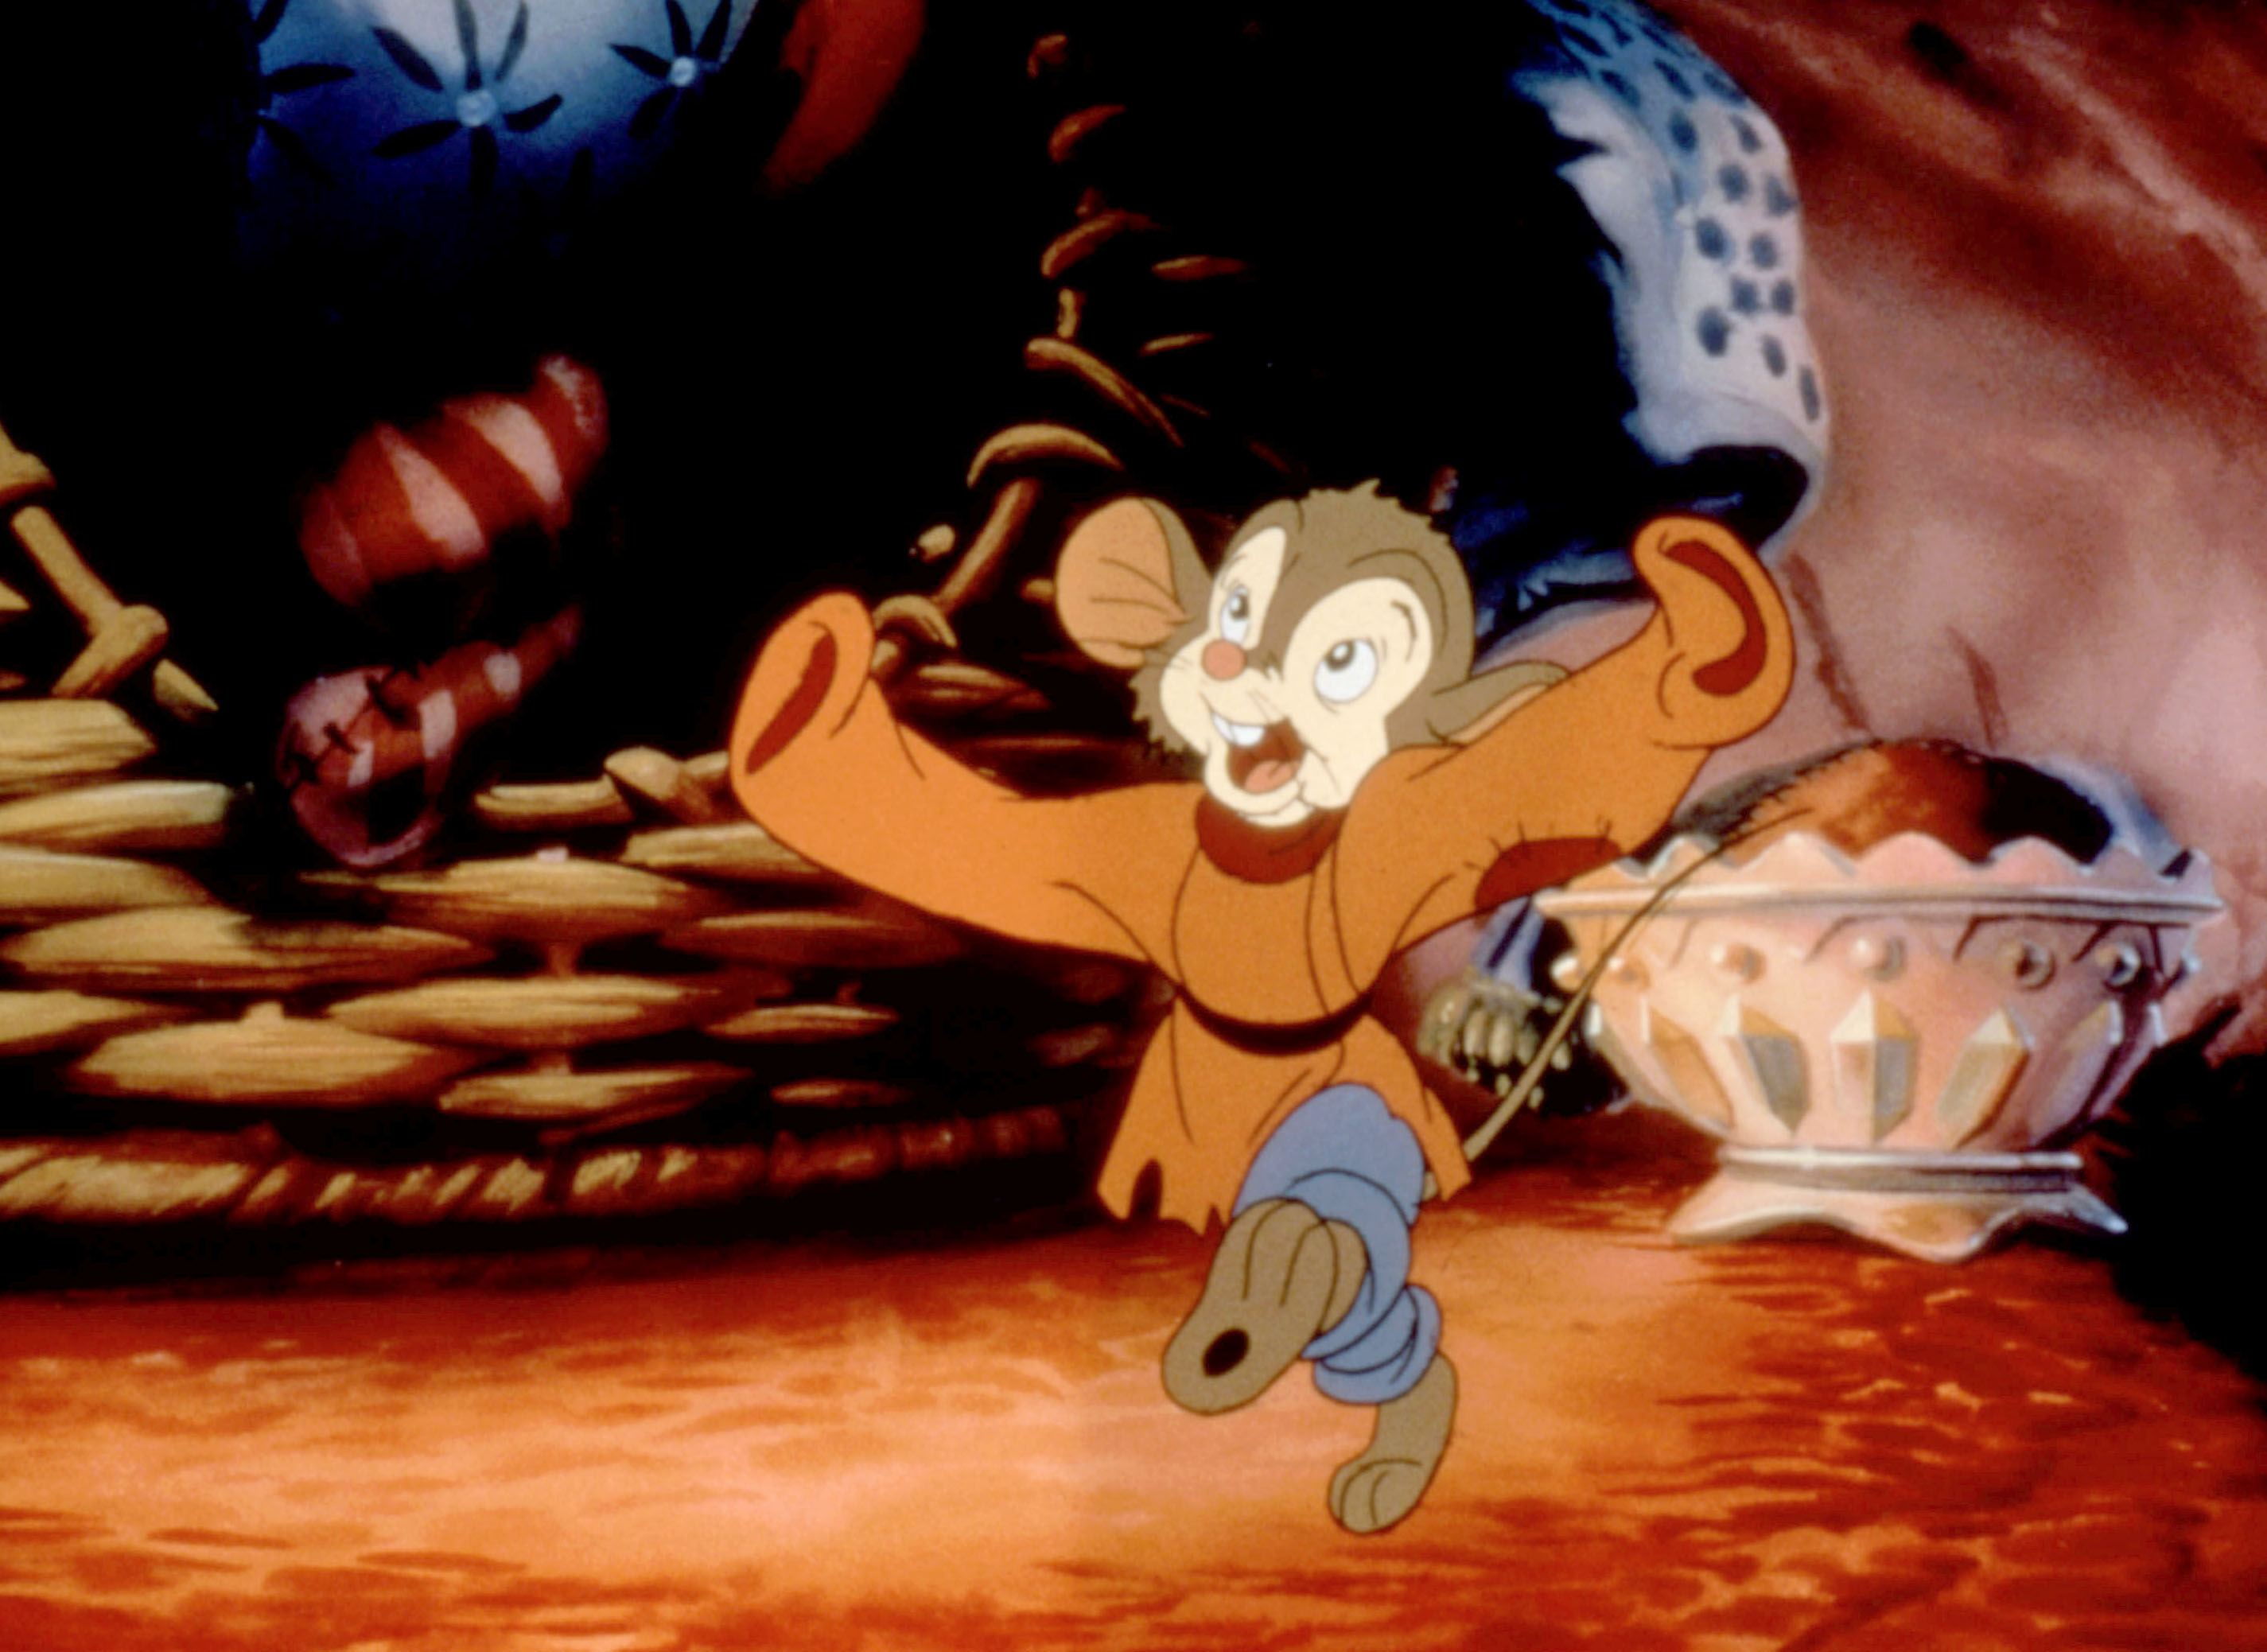 Fievel, an animated mouse from &quot;An American Tail,&quot; looks excited, escaping a woven basket